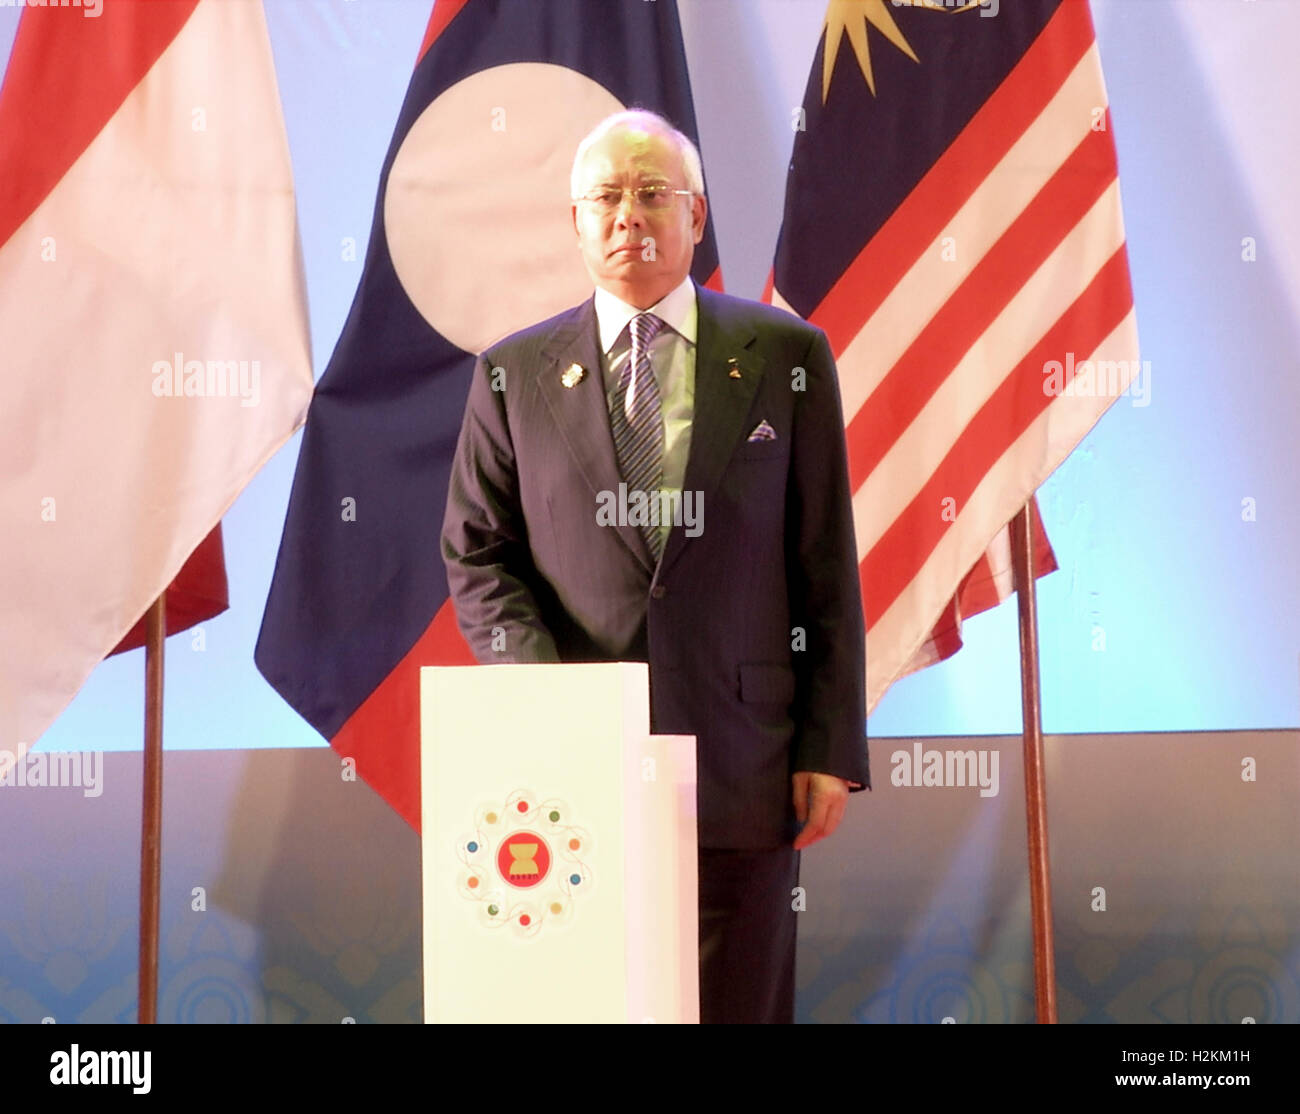 Najib Razak, Prime Minister of Malaysia attends the opening ceremonies at the Association of Southeast Asian Nations (ASEAN) summit the Laotian capital Vientiane. Stock Photo